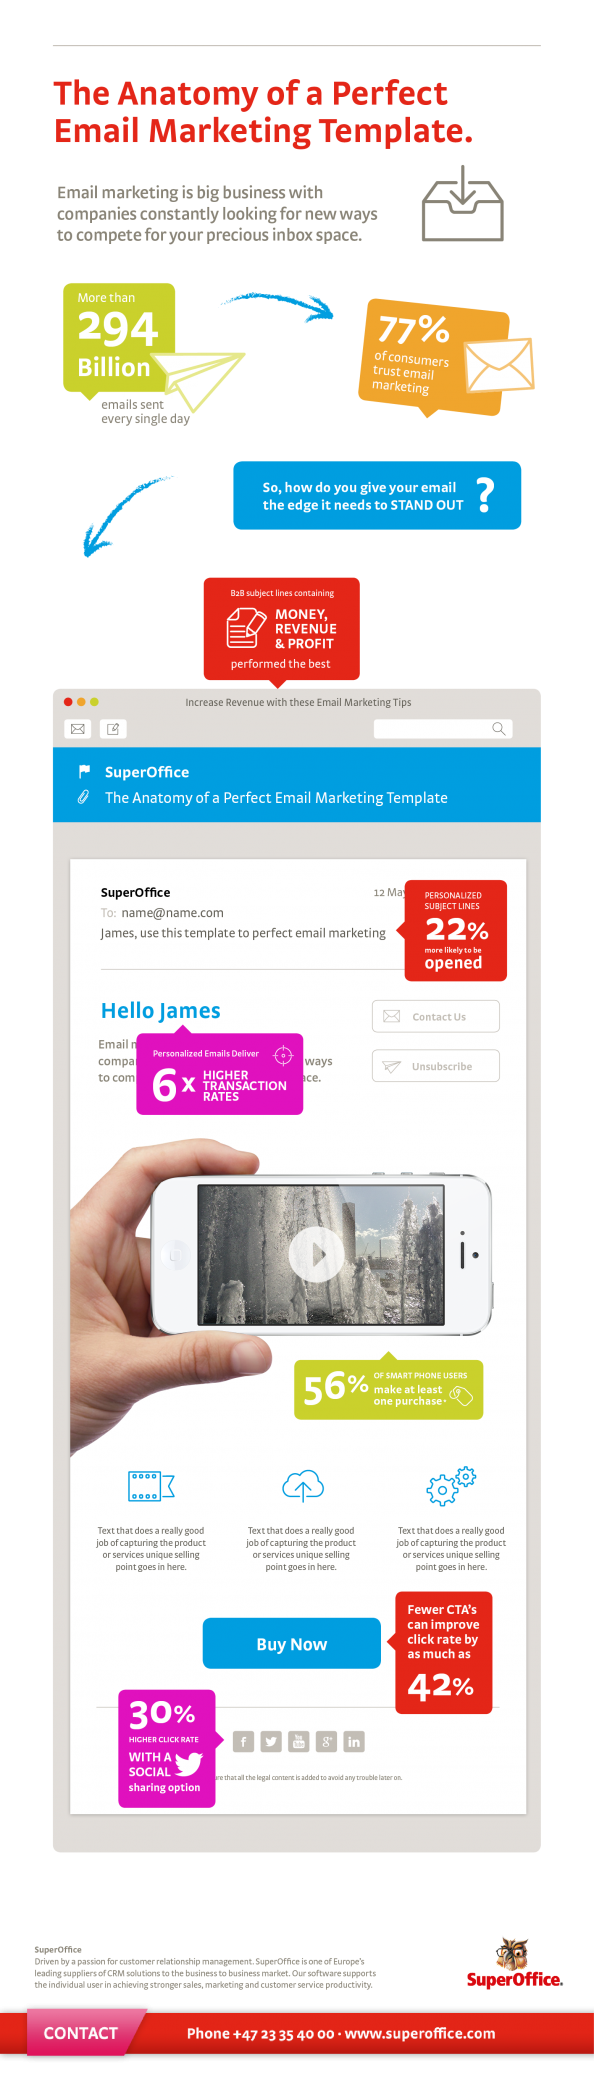 Email marketing template free download infographic